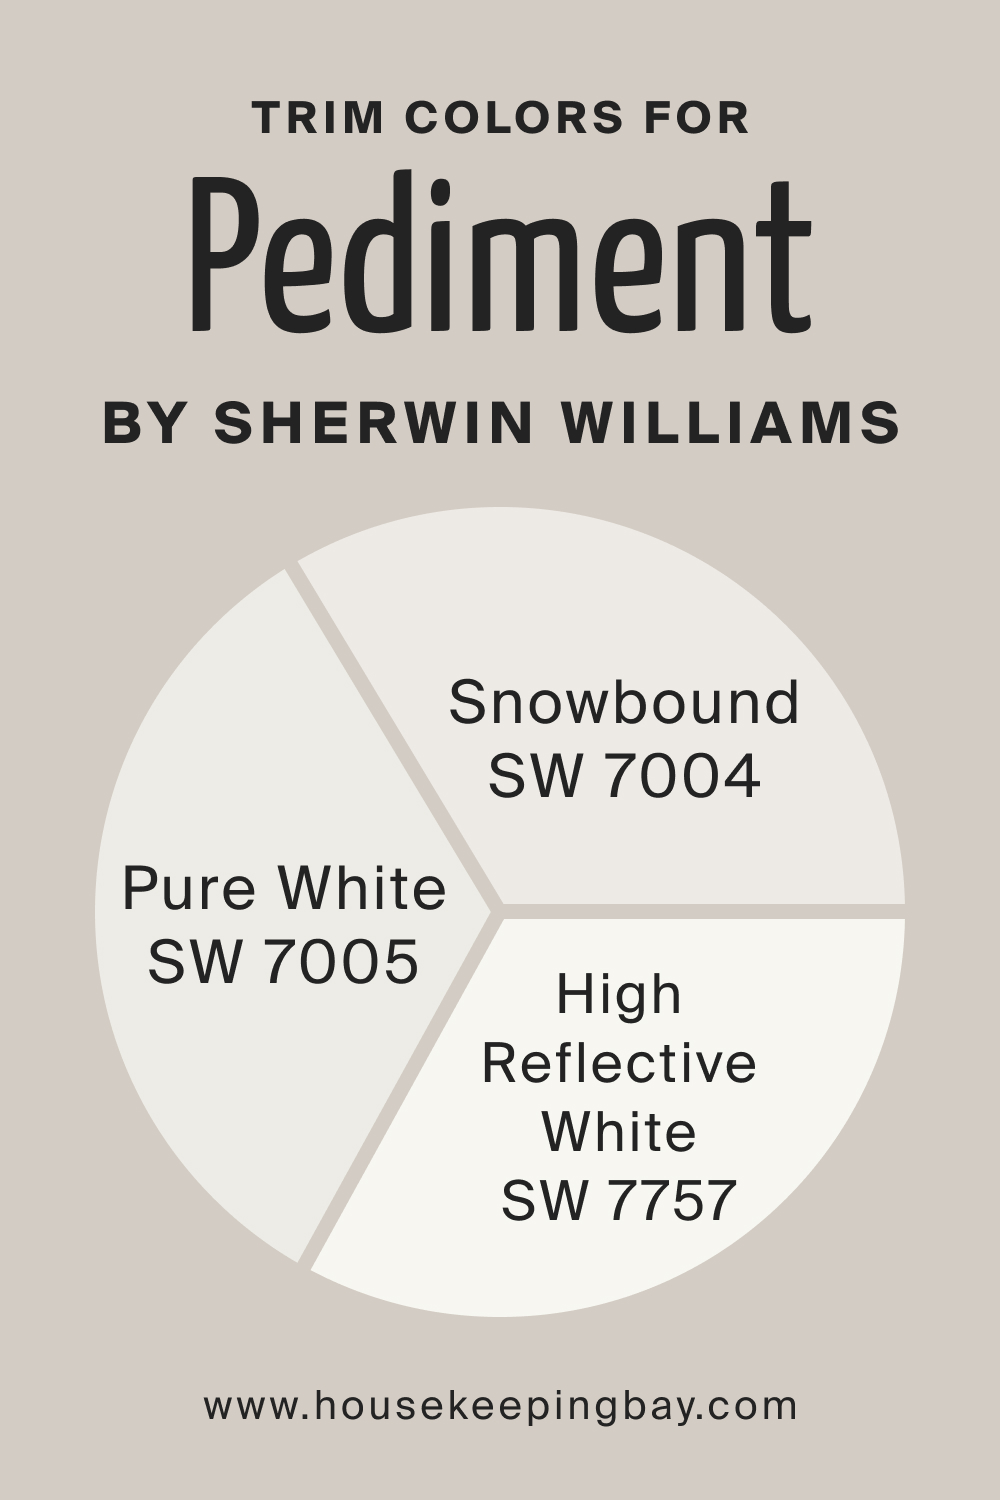 Trim Colors for Pediment SW 7634 by Sherwin Williams